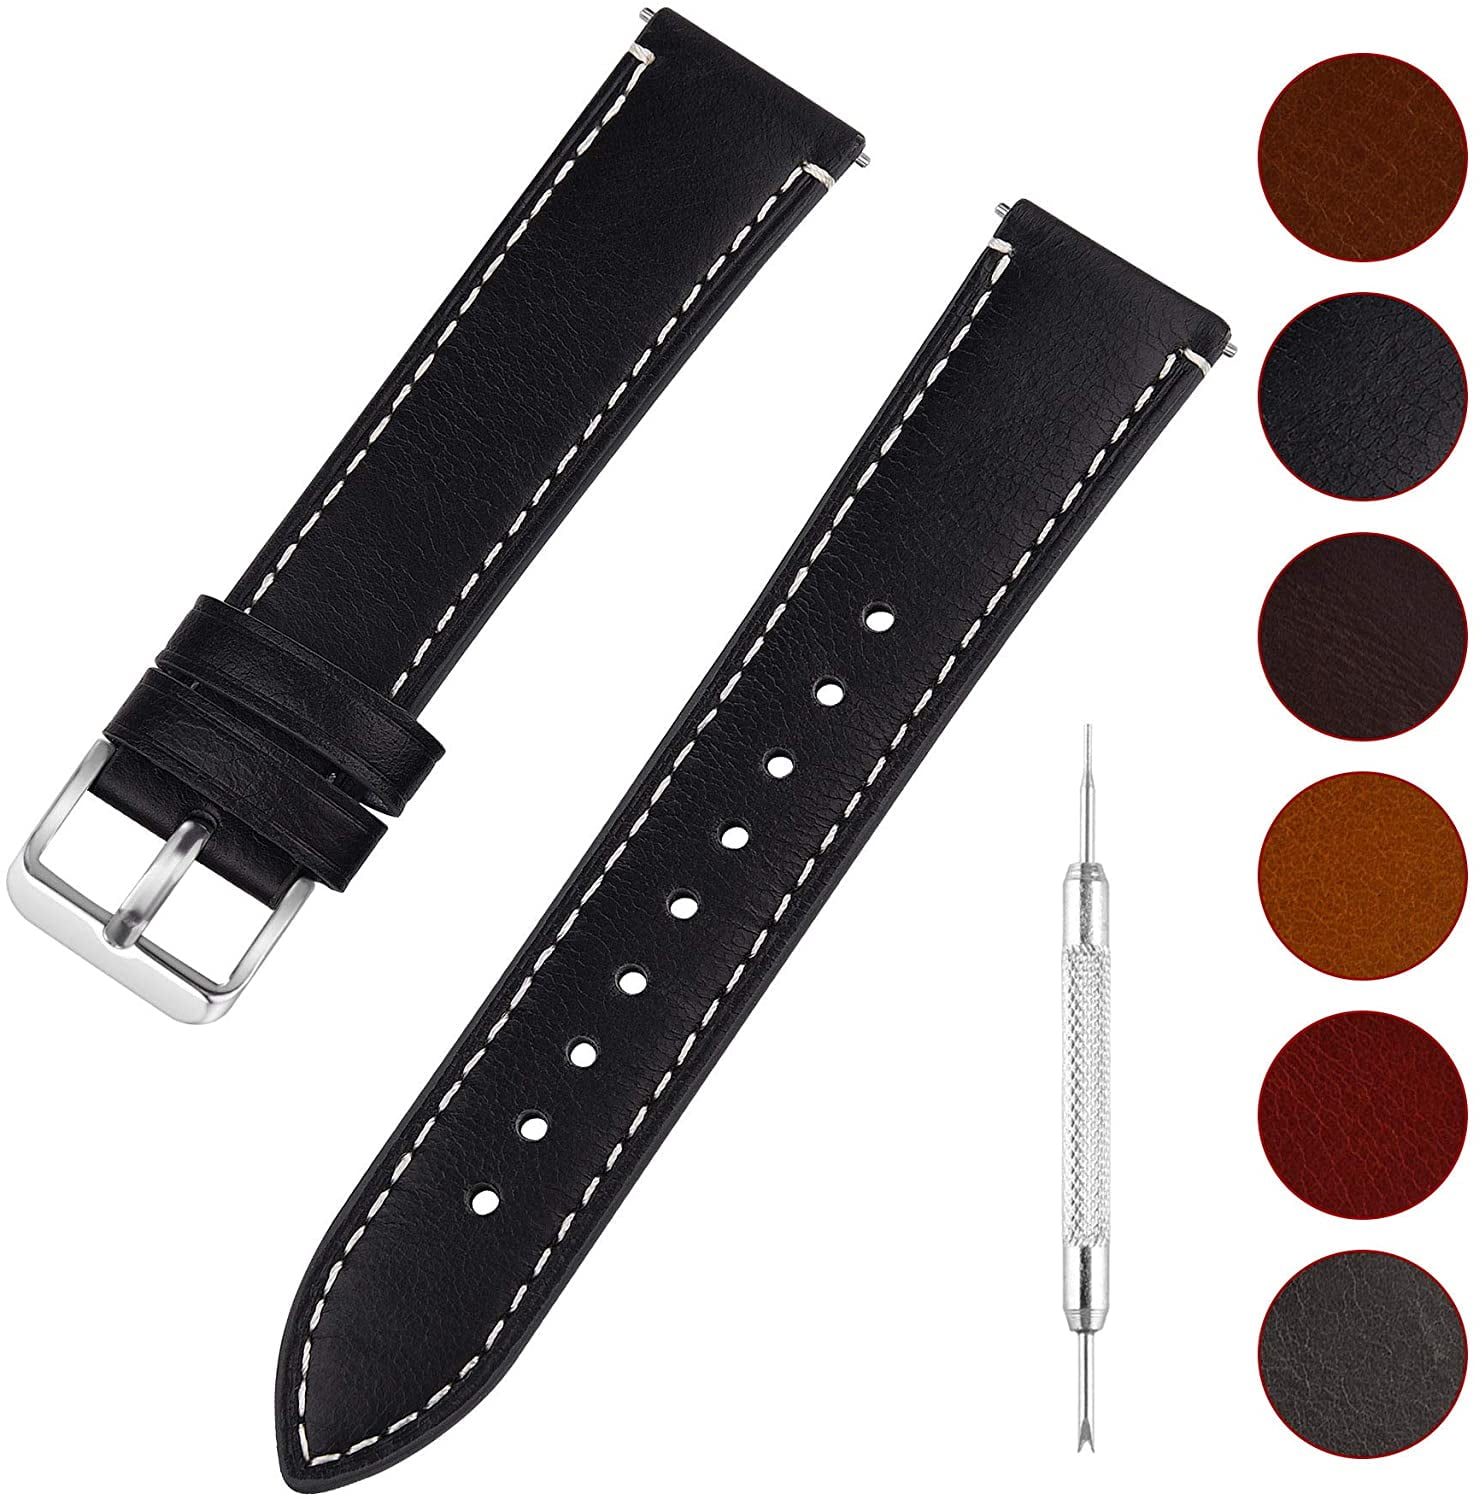 Accessorize GENUINE LEATHER LATEST FASHION SILVER WATCH STRAP 18MM 20MM NEW 